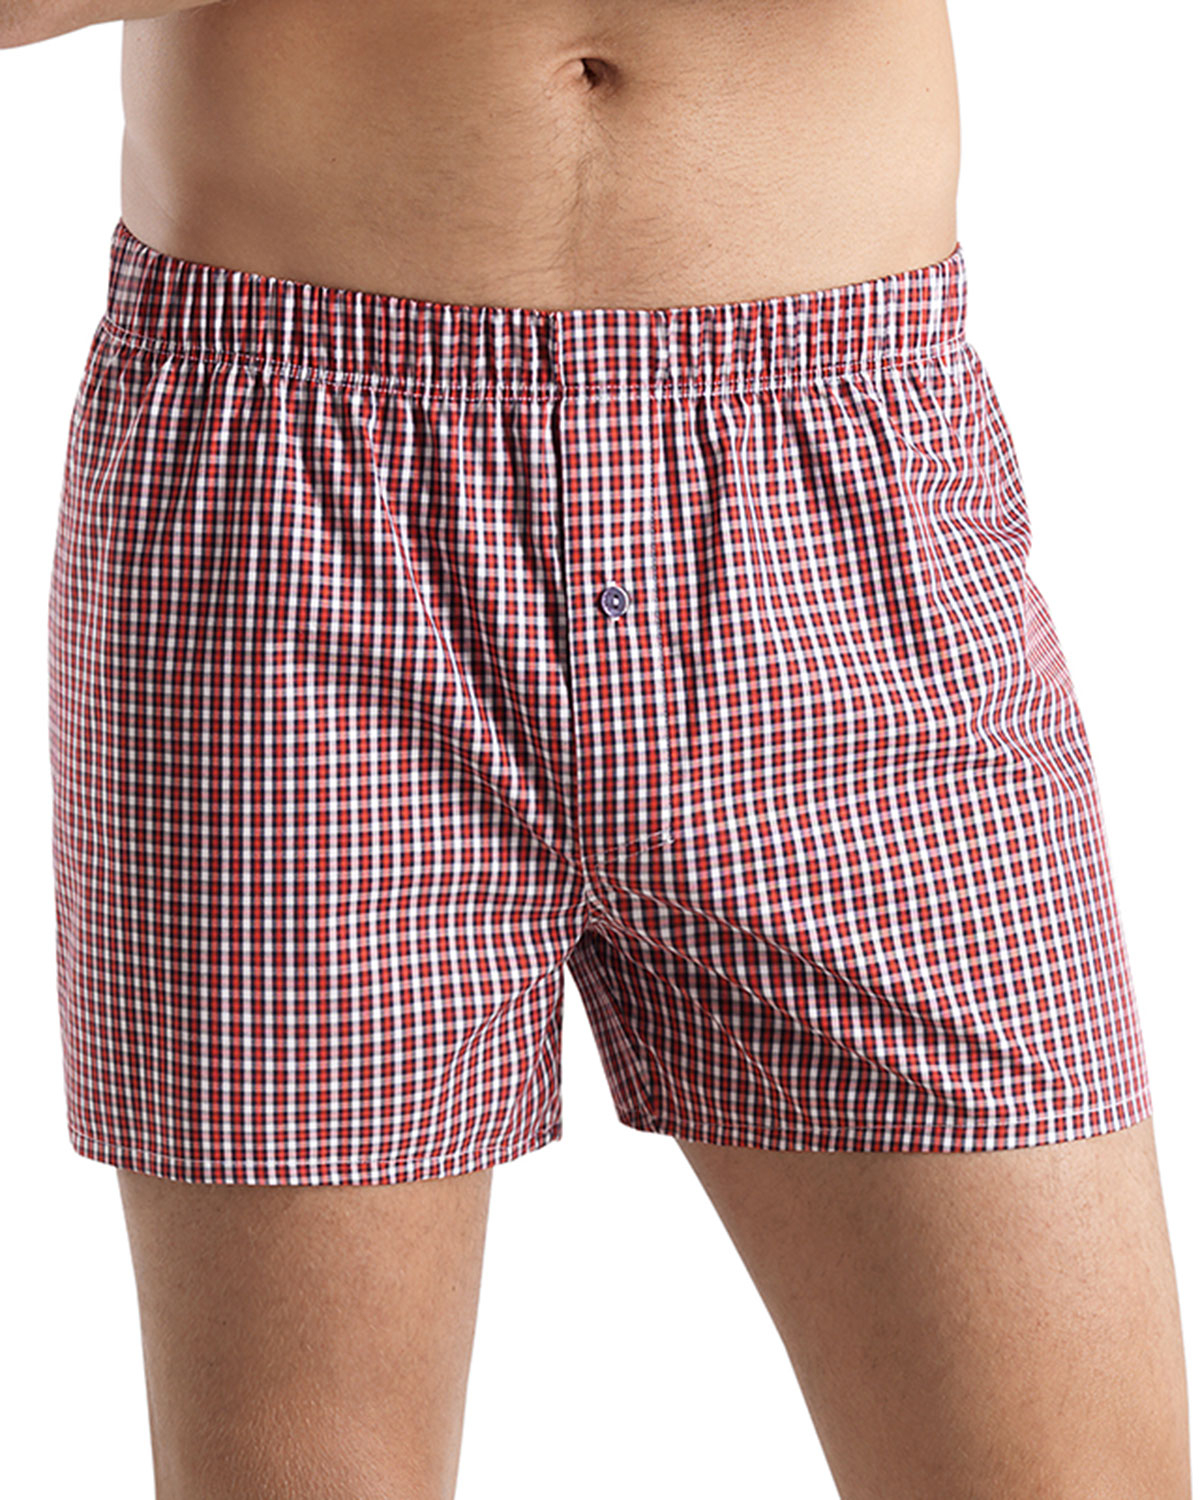 Lyst - Hanro Fancy Woven Check Boxer Shorts in Red for Men